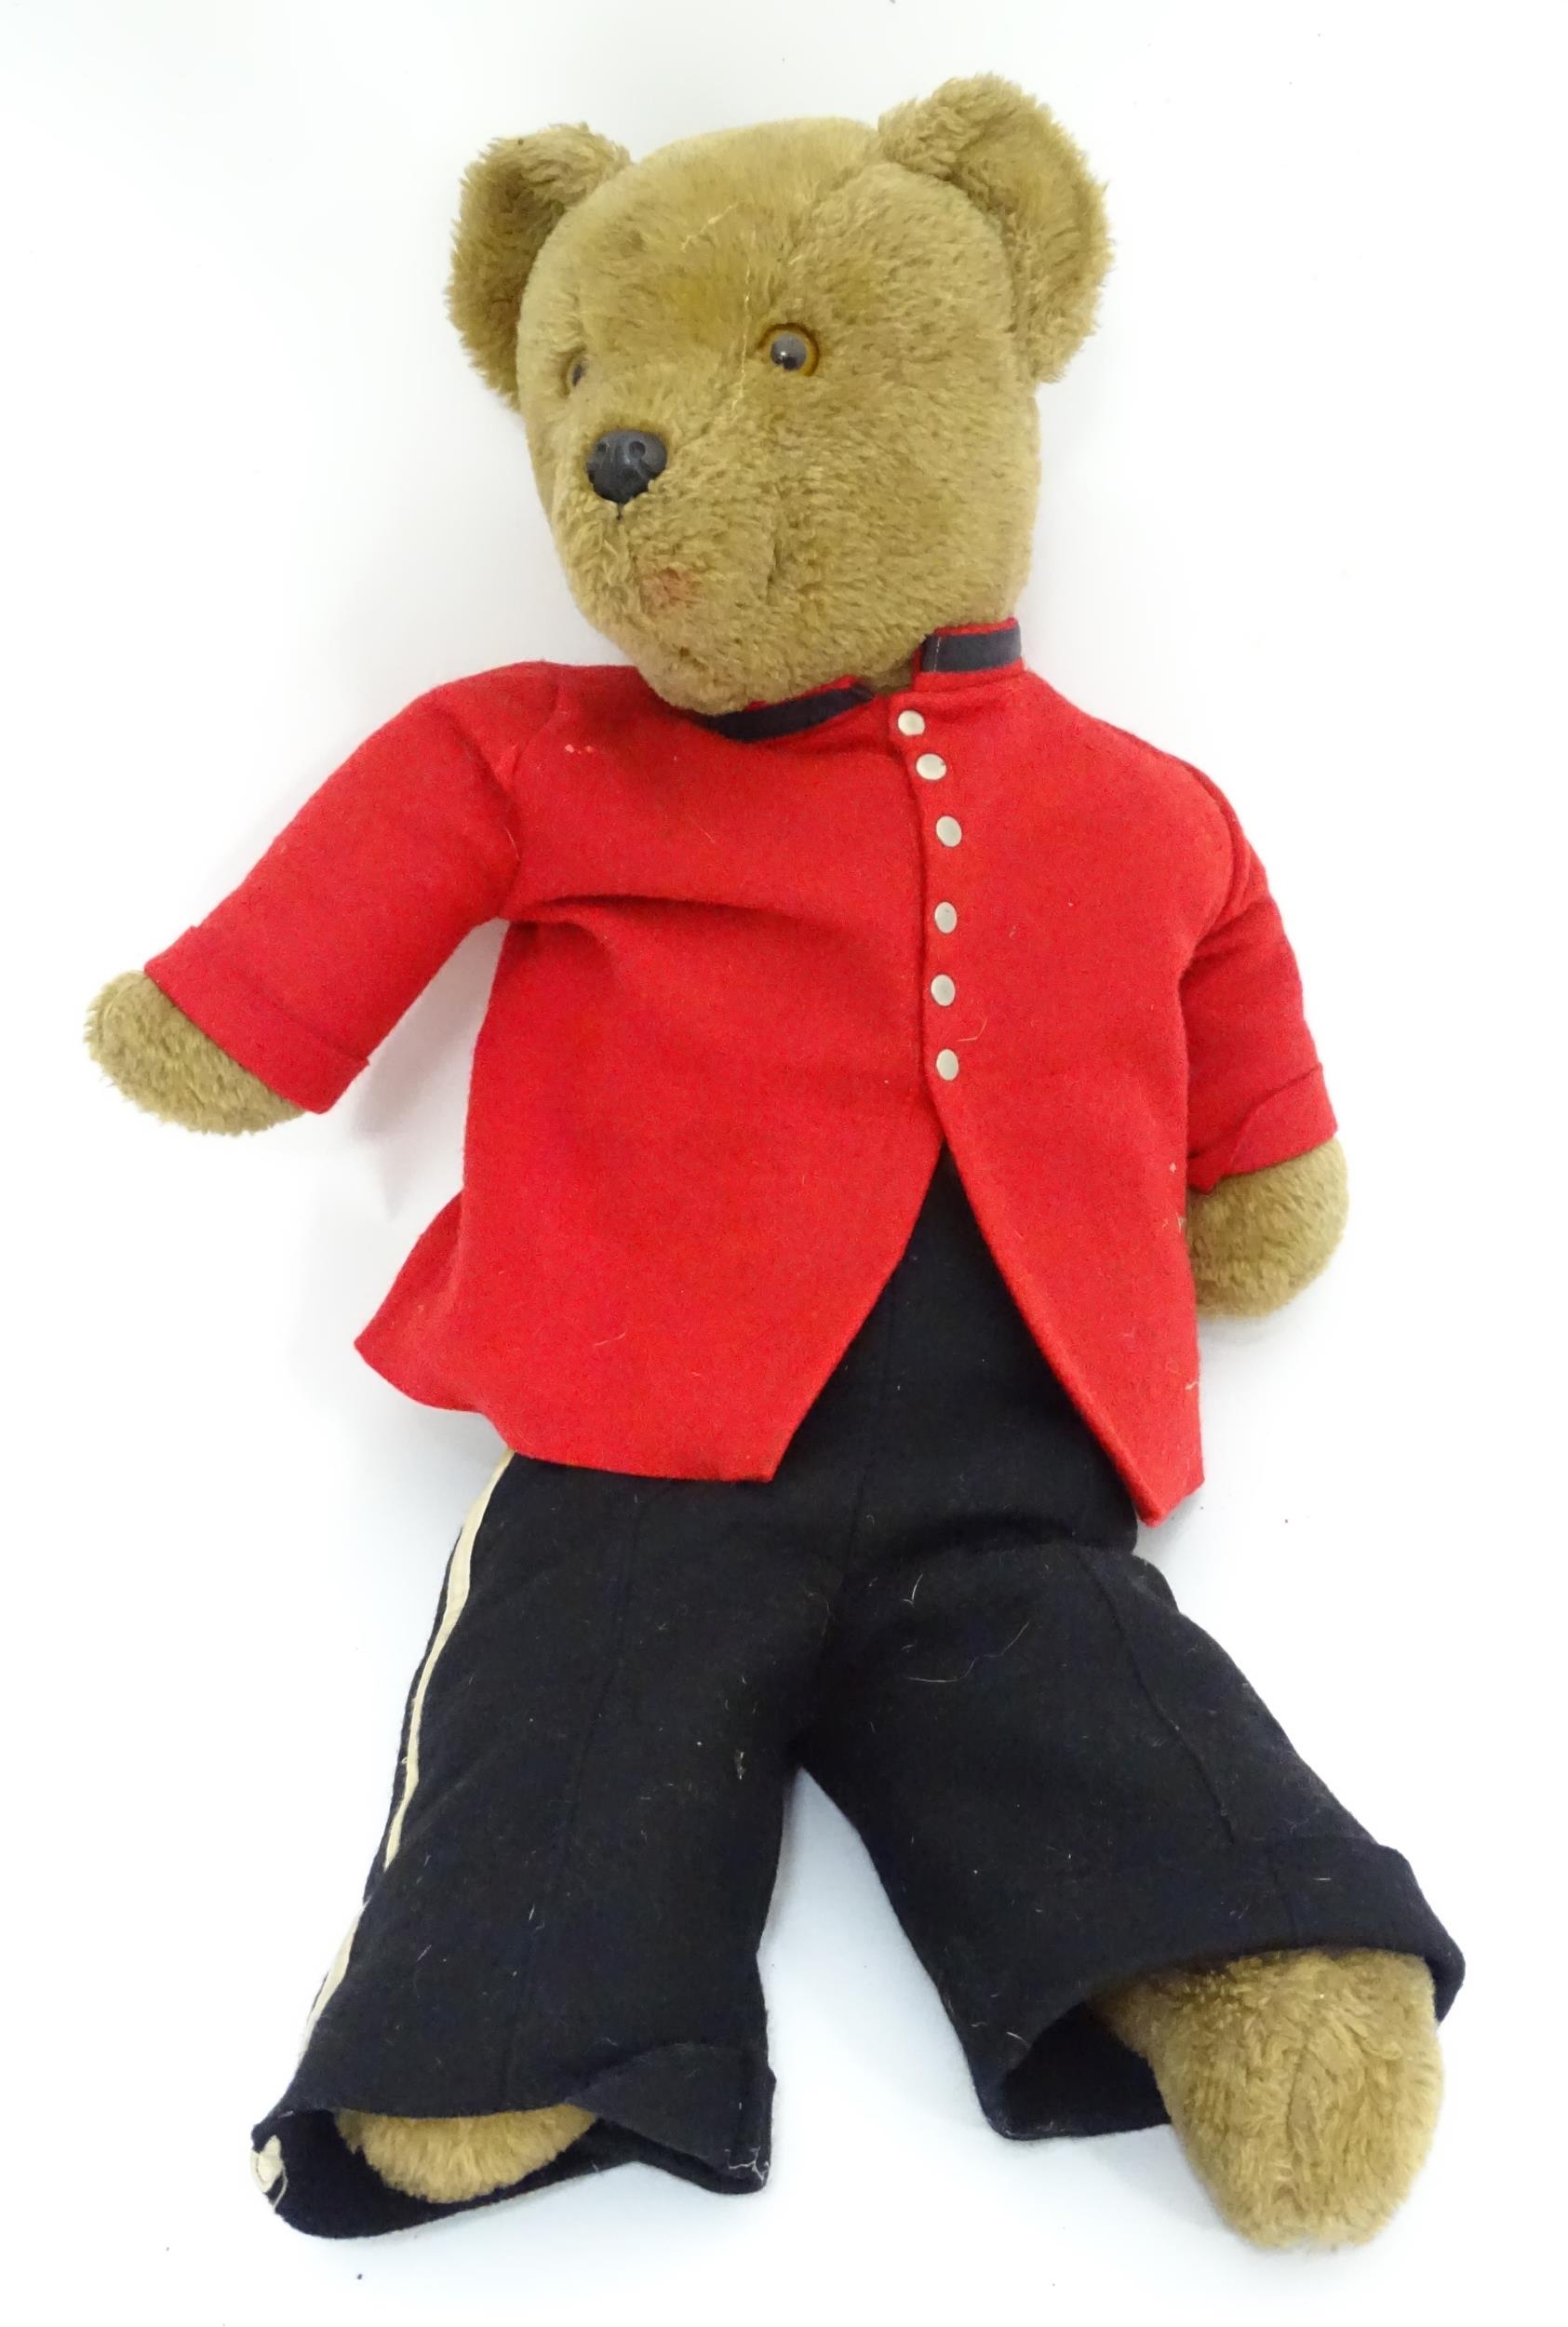 Alresford Crafts Ltd Teddy Bear - dressed as a Chelsea Pensioner Please Note - we do not make